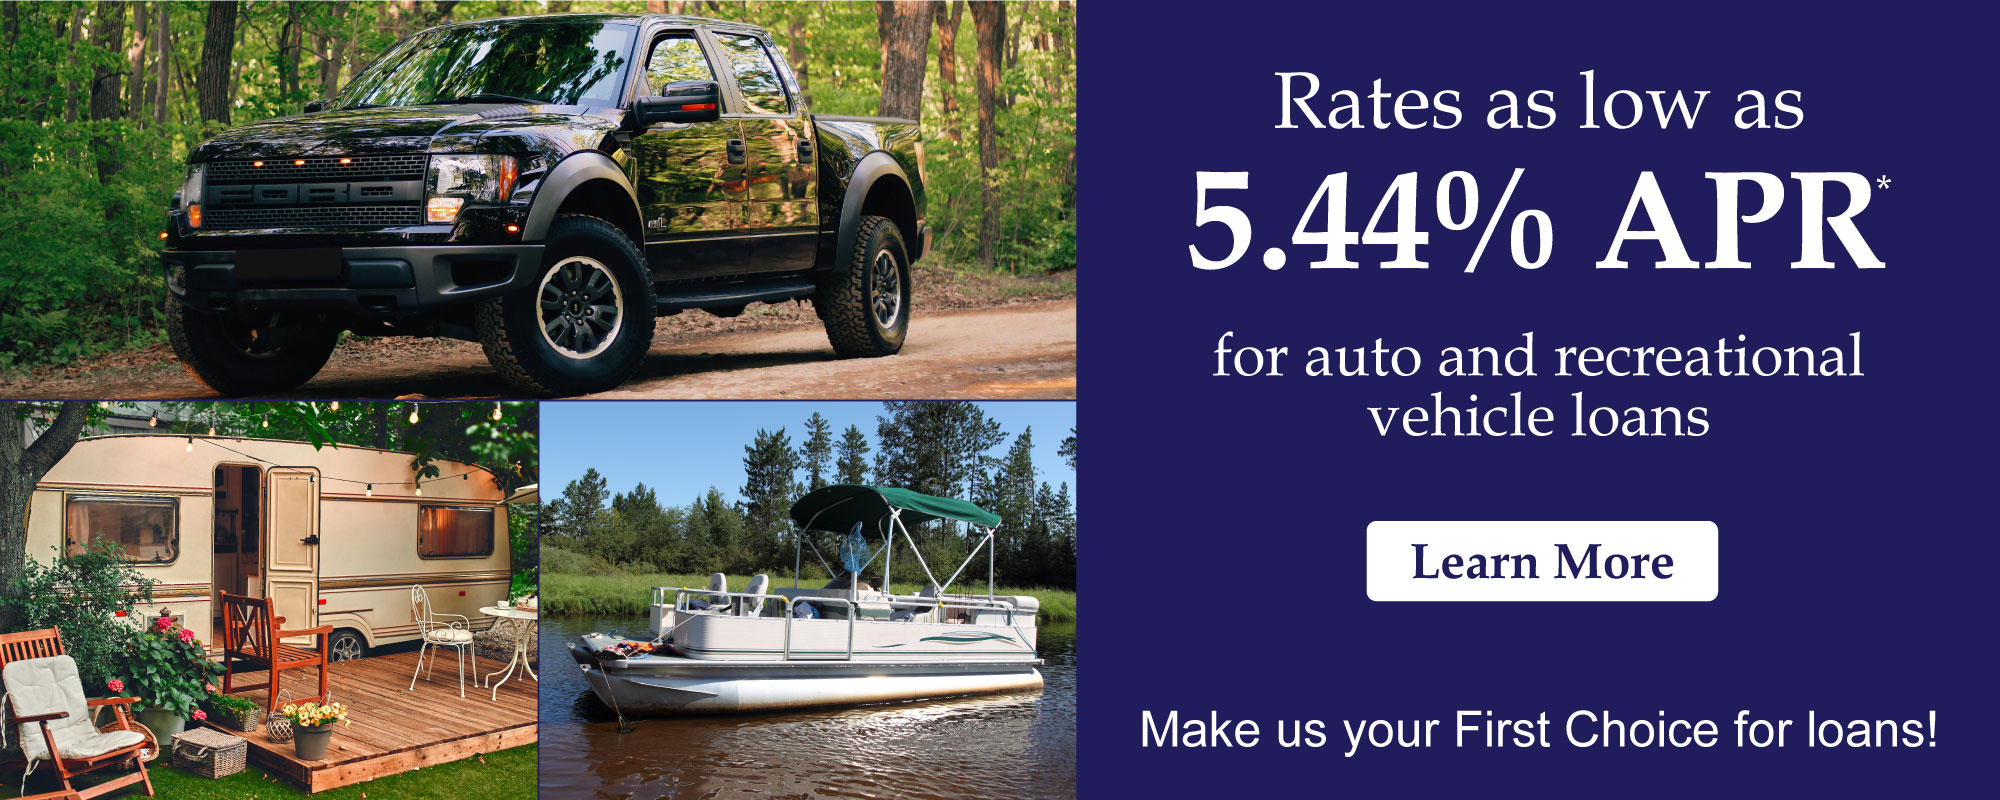 Rates as low as 5.44% APR on auto and recreational vehicle loans